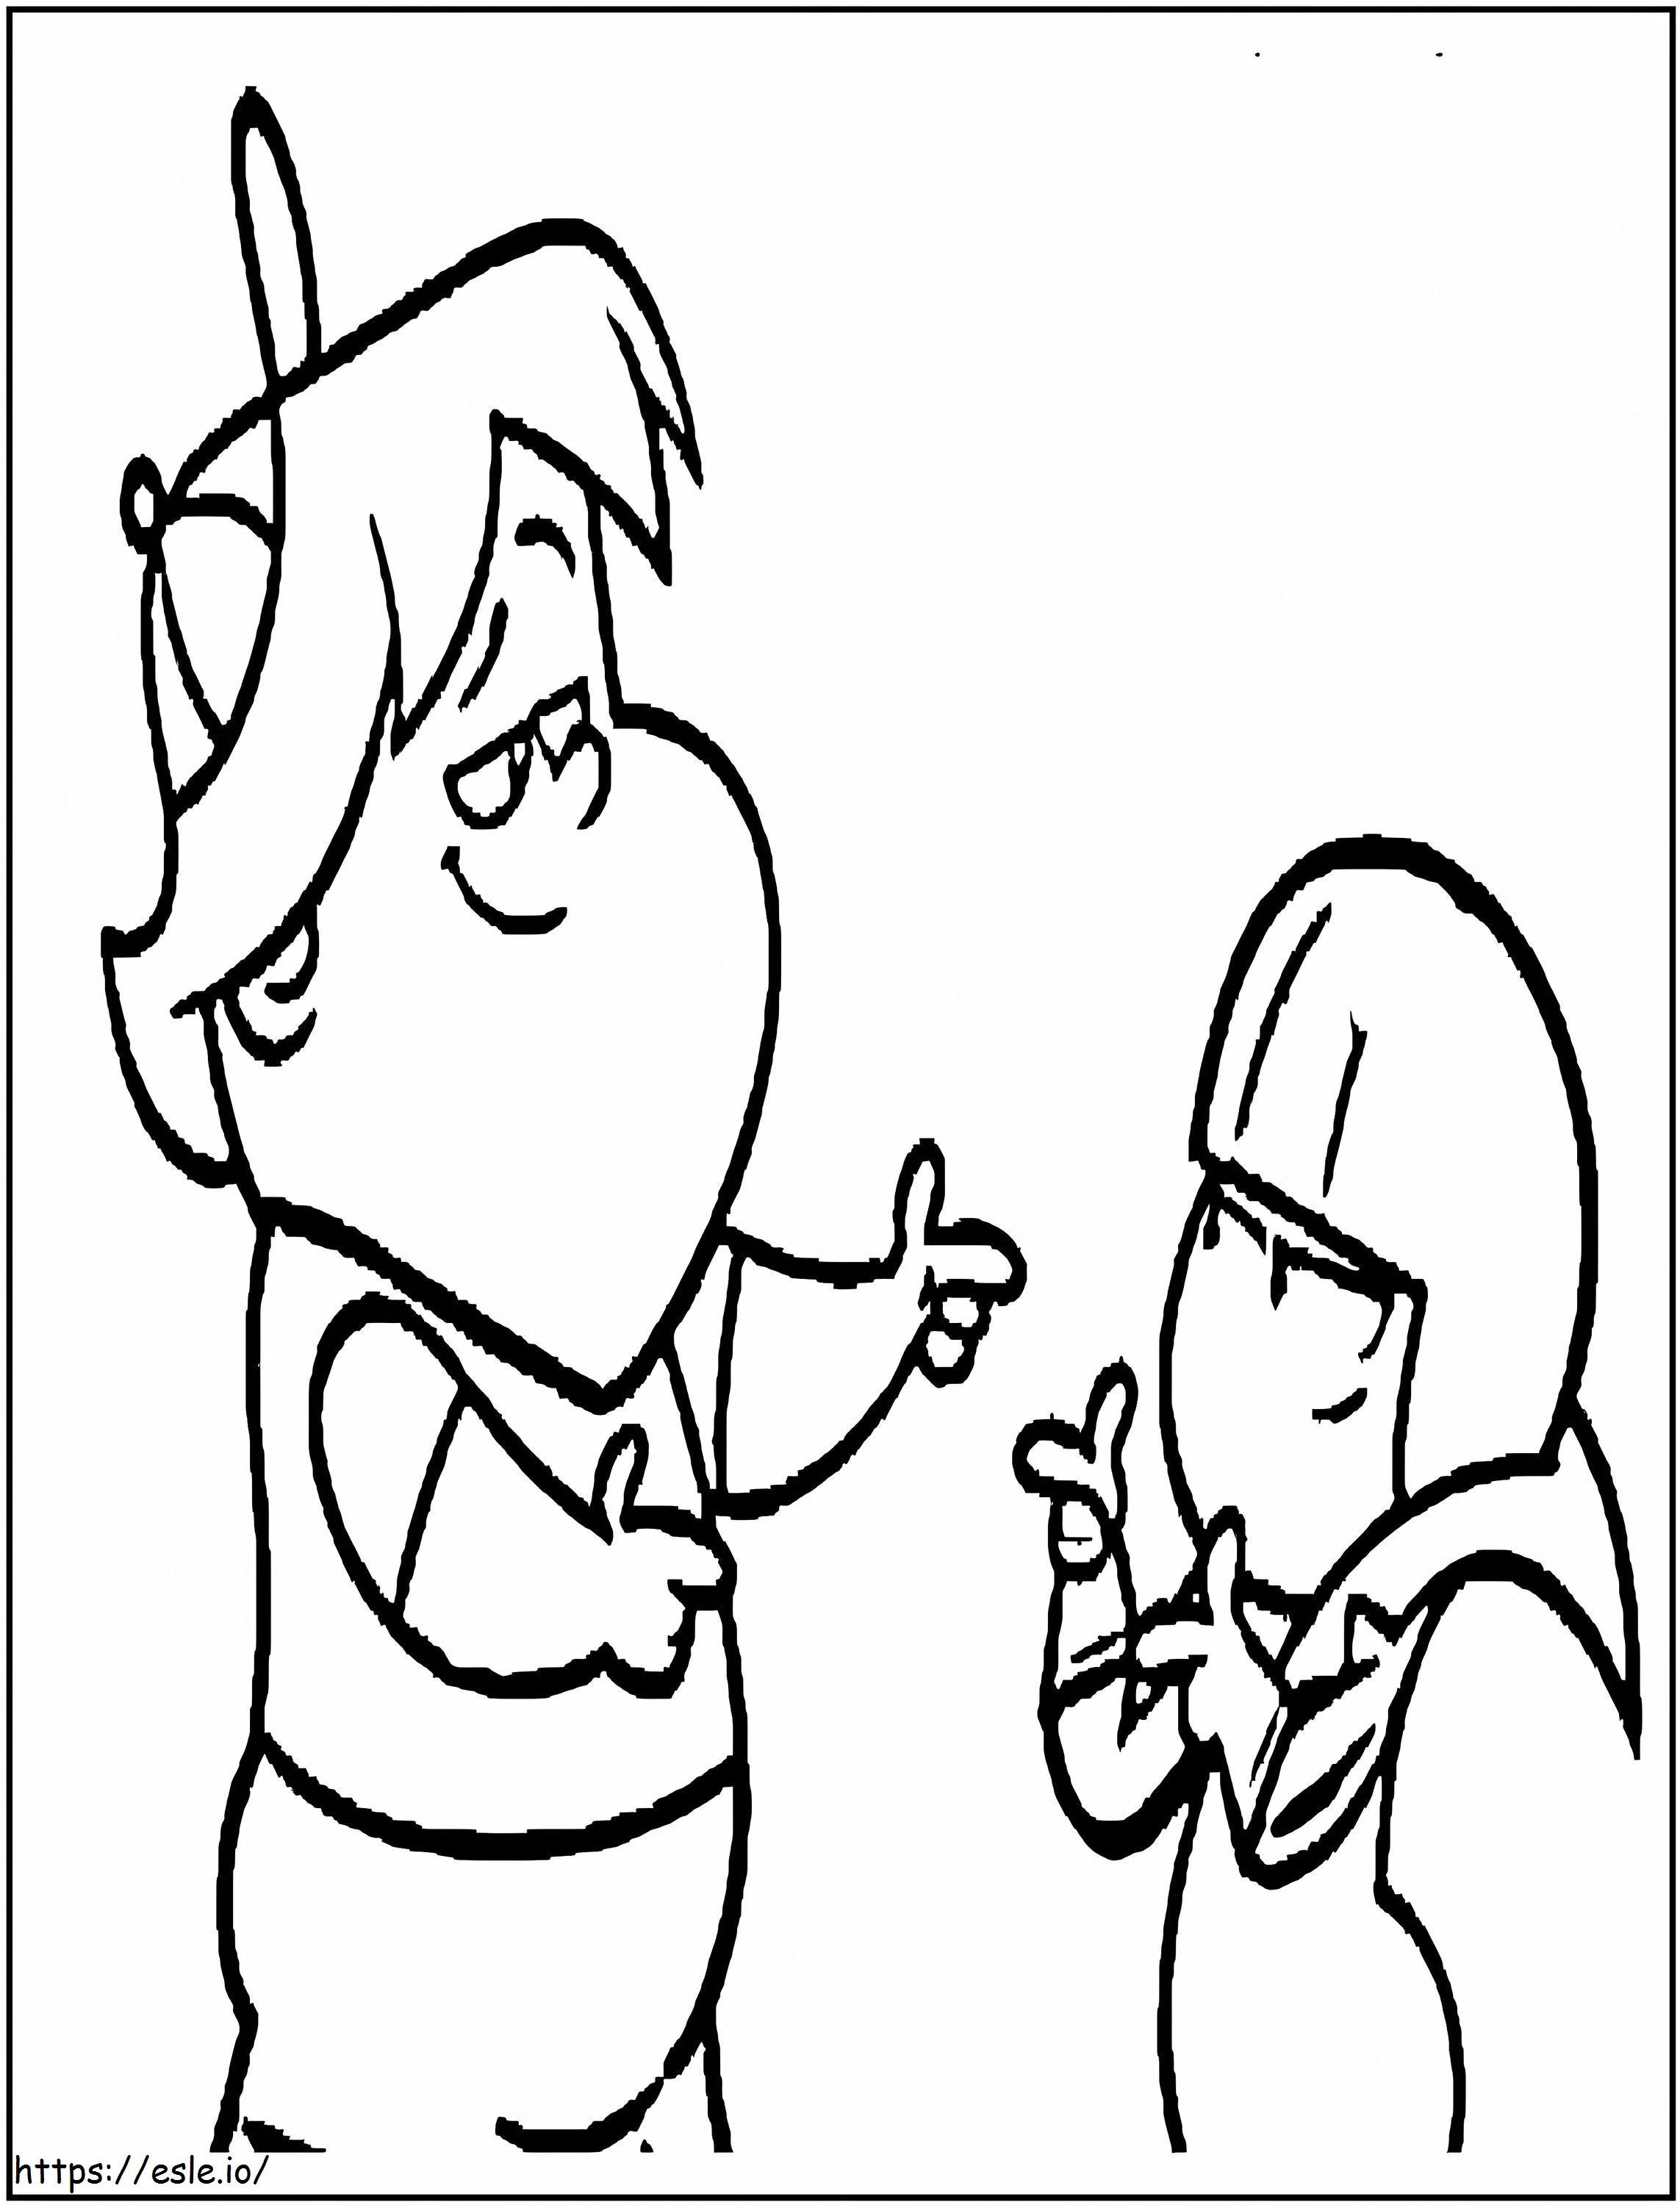 Kick Buttowski And Gunther 1 coloring page